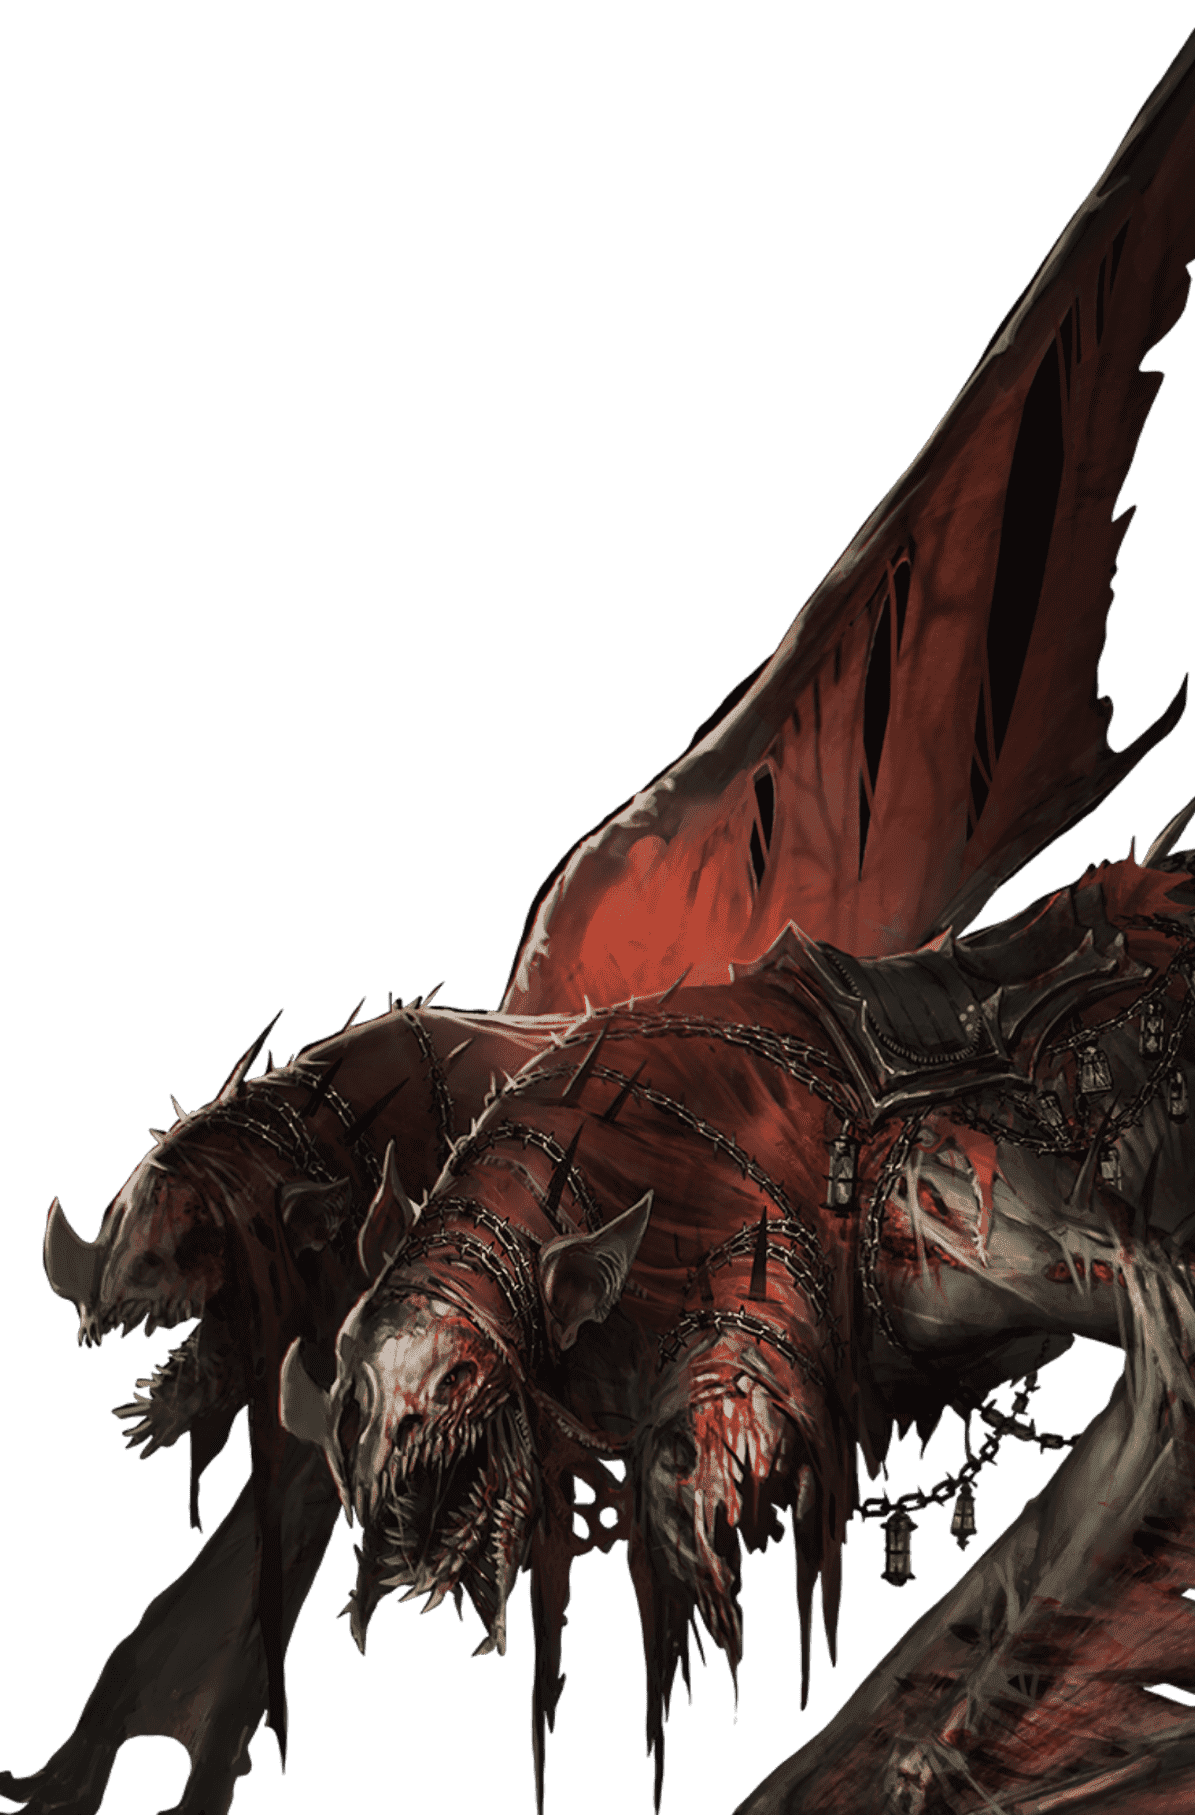 The Corrupted Champions loyal draconic 3 headed mount that the crusader must face in the world of The Lords of the Fallen